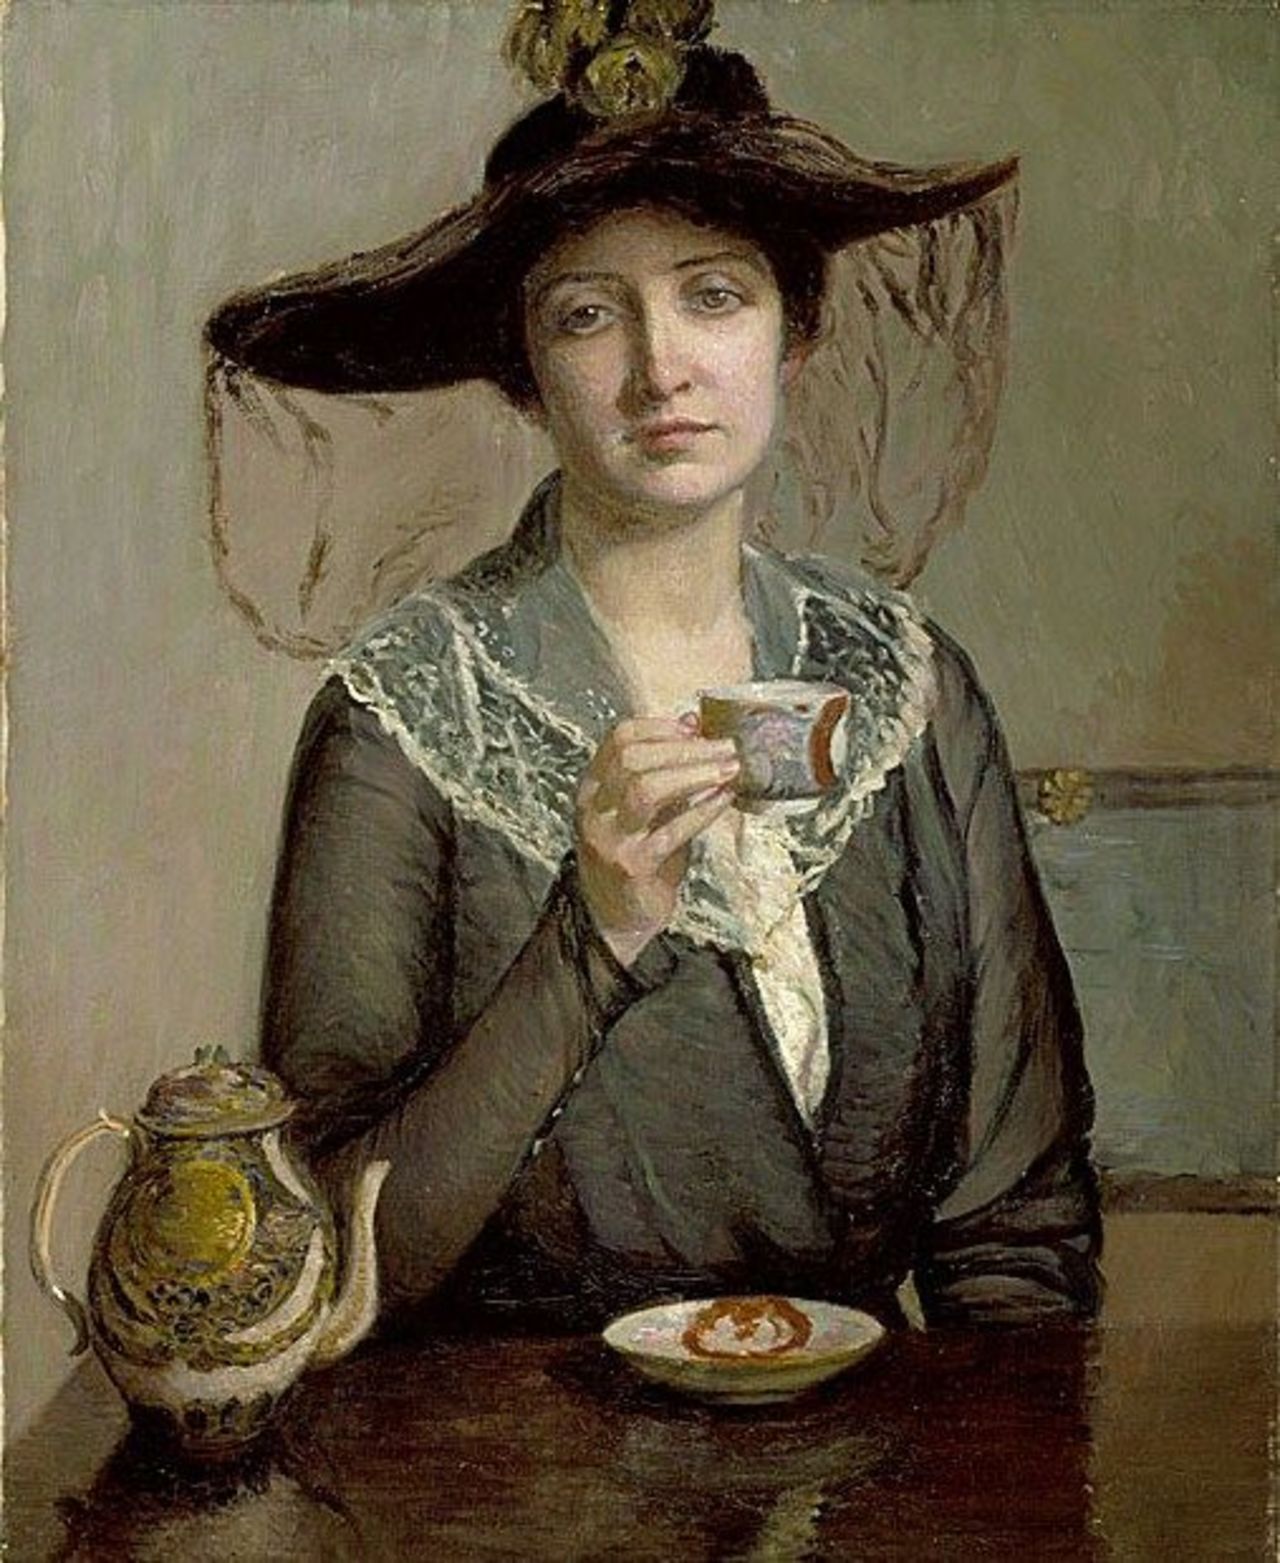 RT @marcelcel3: Its About Time: Tea - Lilla Cabot Perry (American artist) 1848 - 1933#art #painting #twitart https://t.co/tVV3Tm4dfd